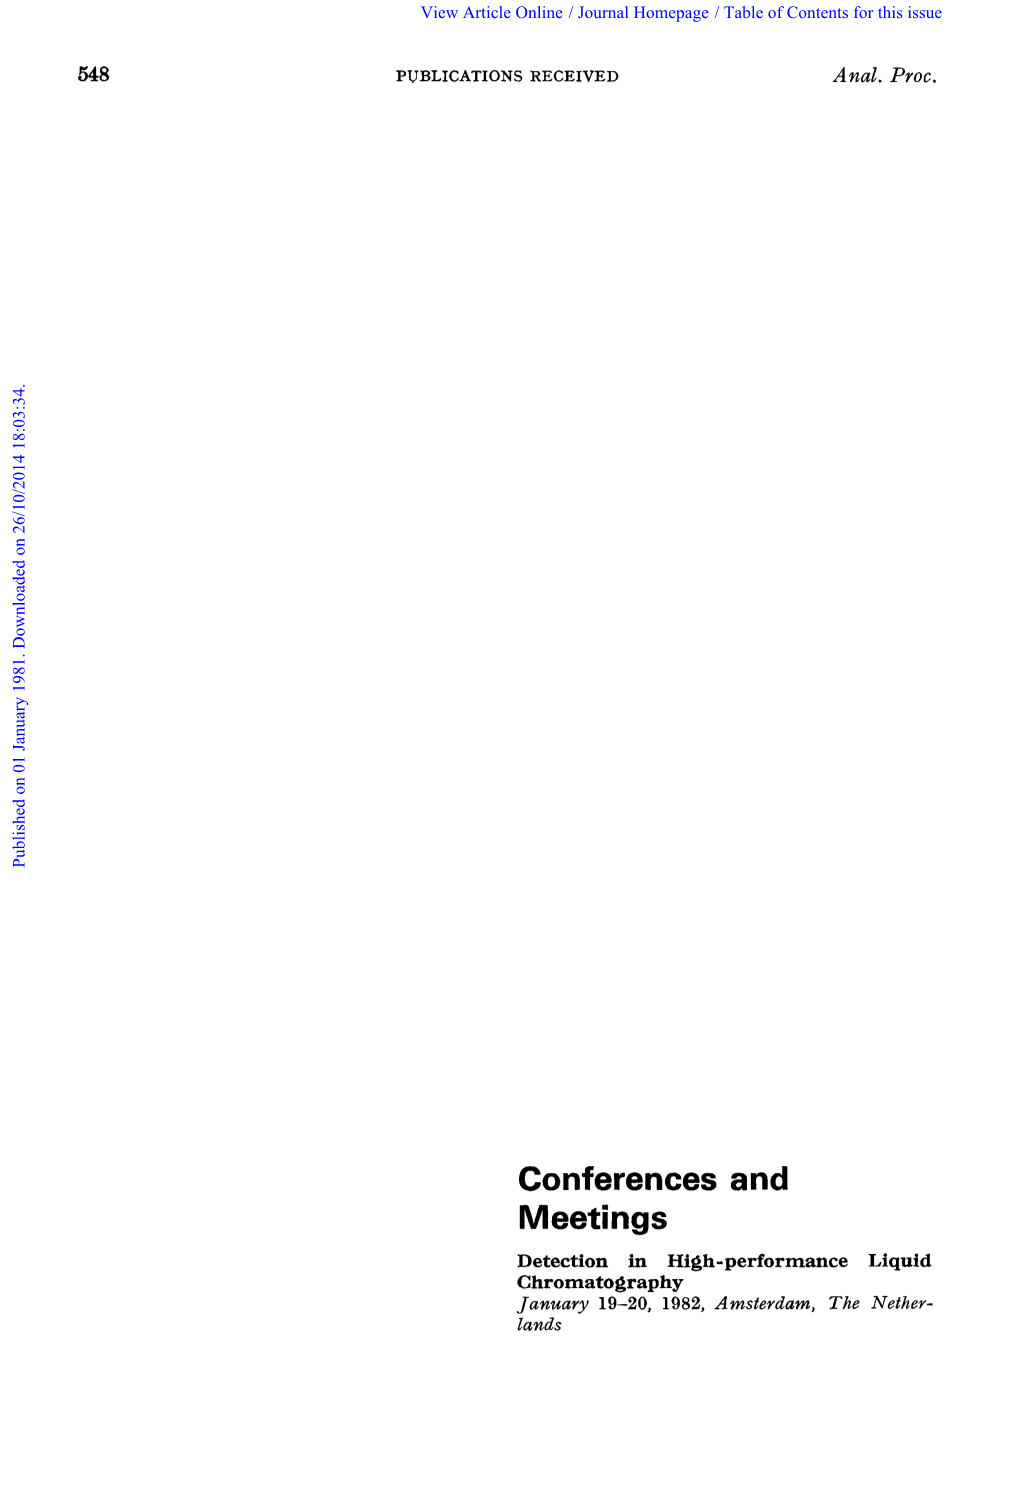 Conferences and Meetings Detection in High-Performance Liquid Chromatography January 19-20, 1982, Amsterdam, the Nether- Lands View Article Online